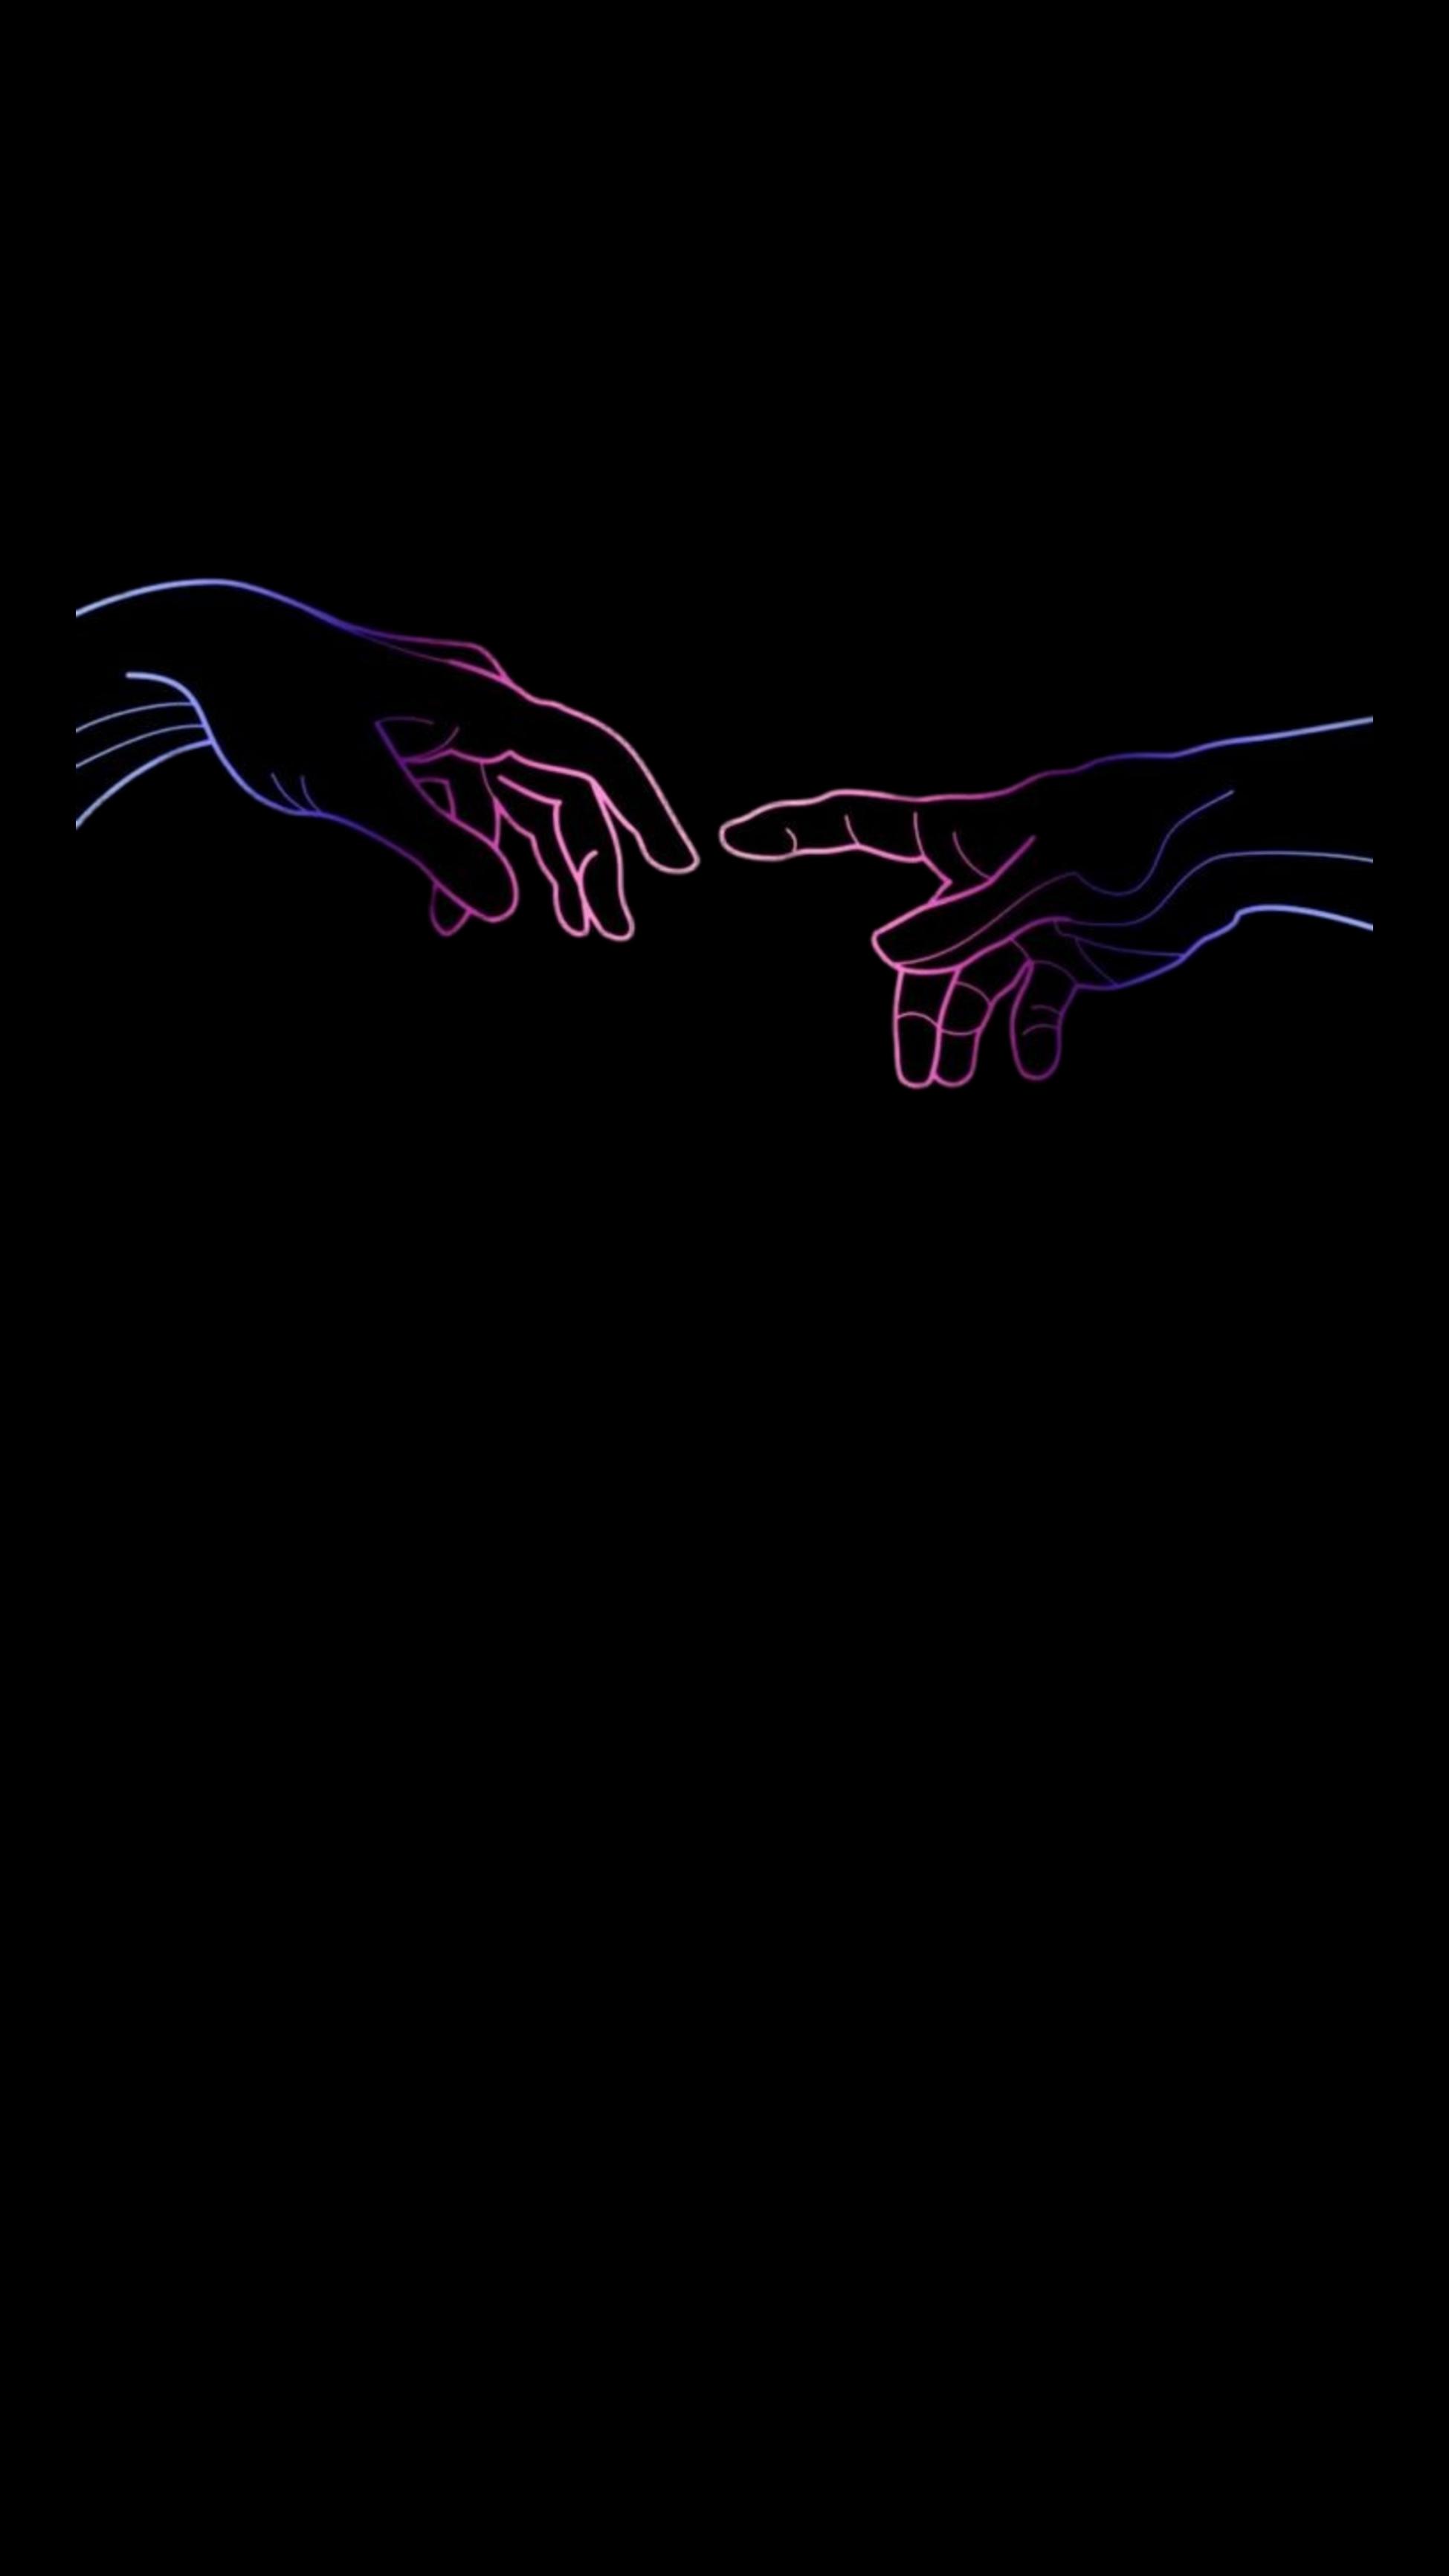 I Made Subtle Bi Colors Wallpaper For Phone. Feel Free To Use, Stay Safe <3